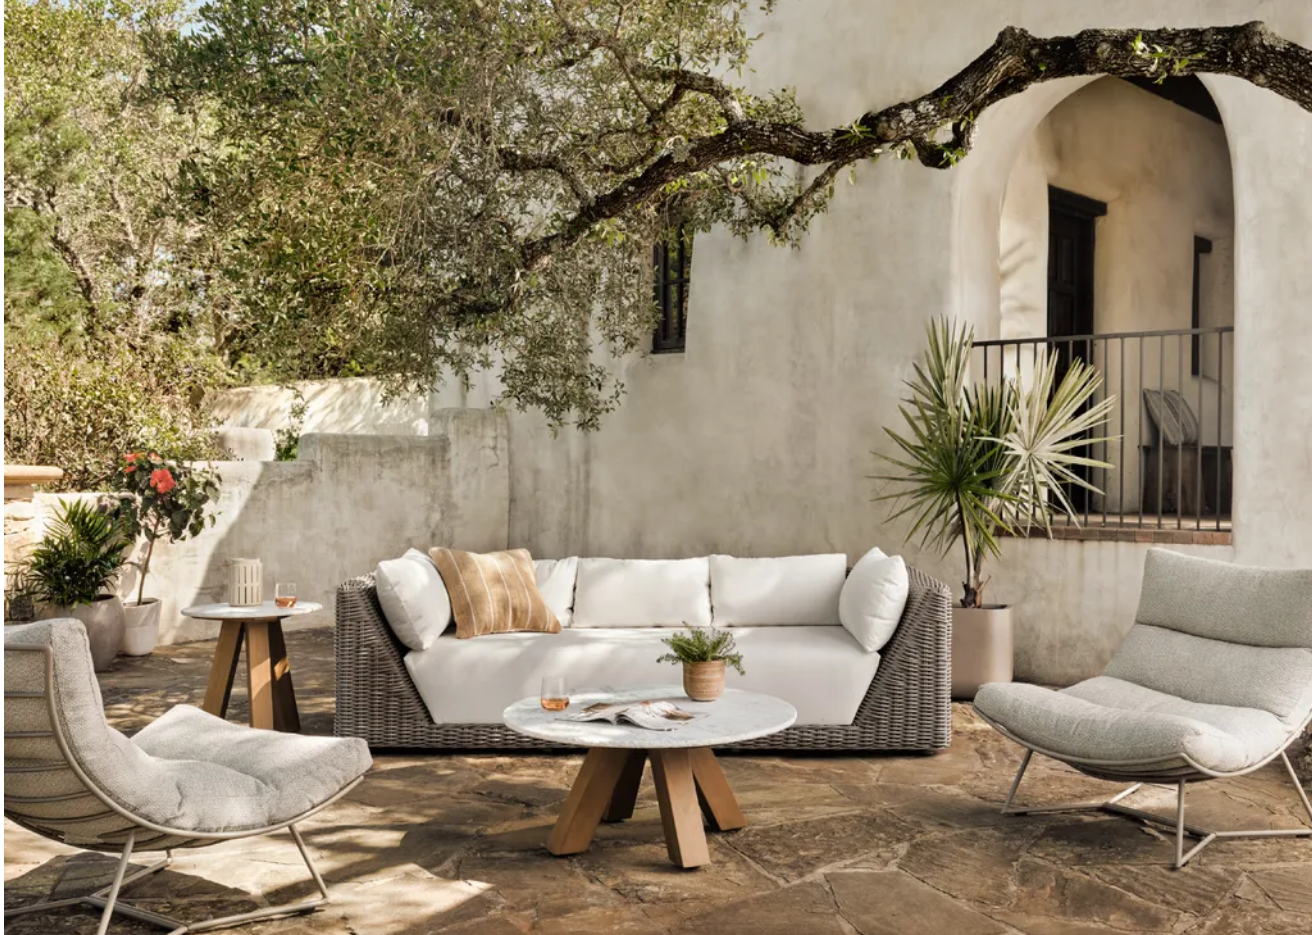 Outdoor furniture for wine country entertaining